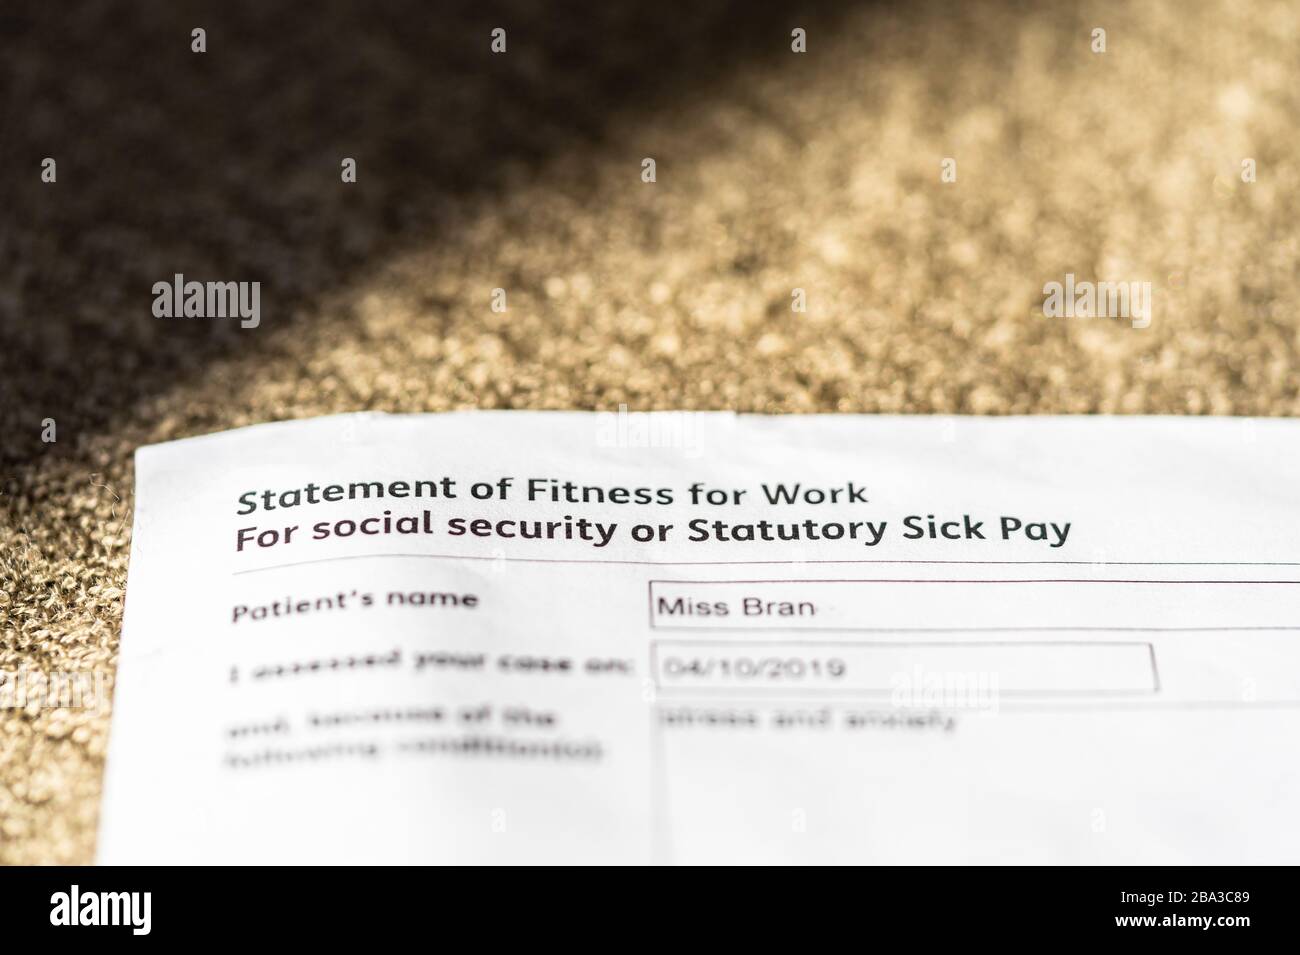 Statement of Fitness for Work for Social Security / Statutory Sick Pay, England, Großbritannien Stockfoto